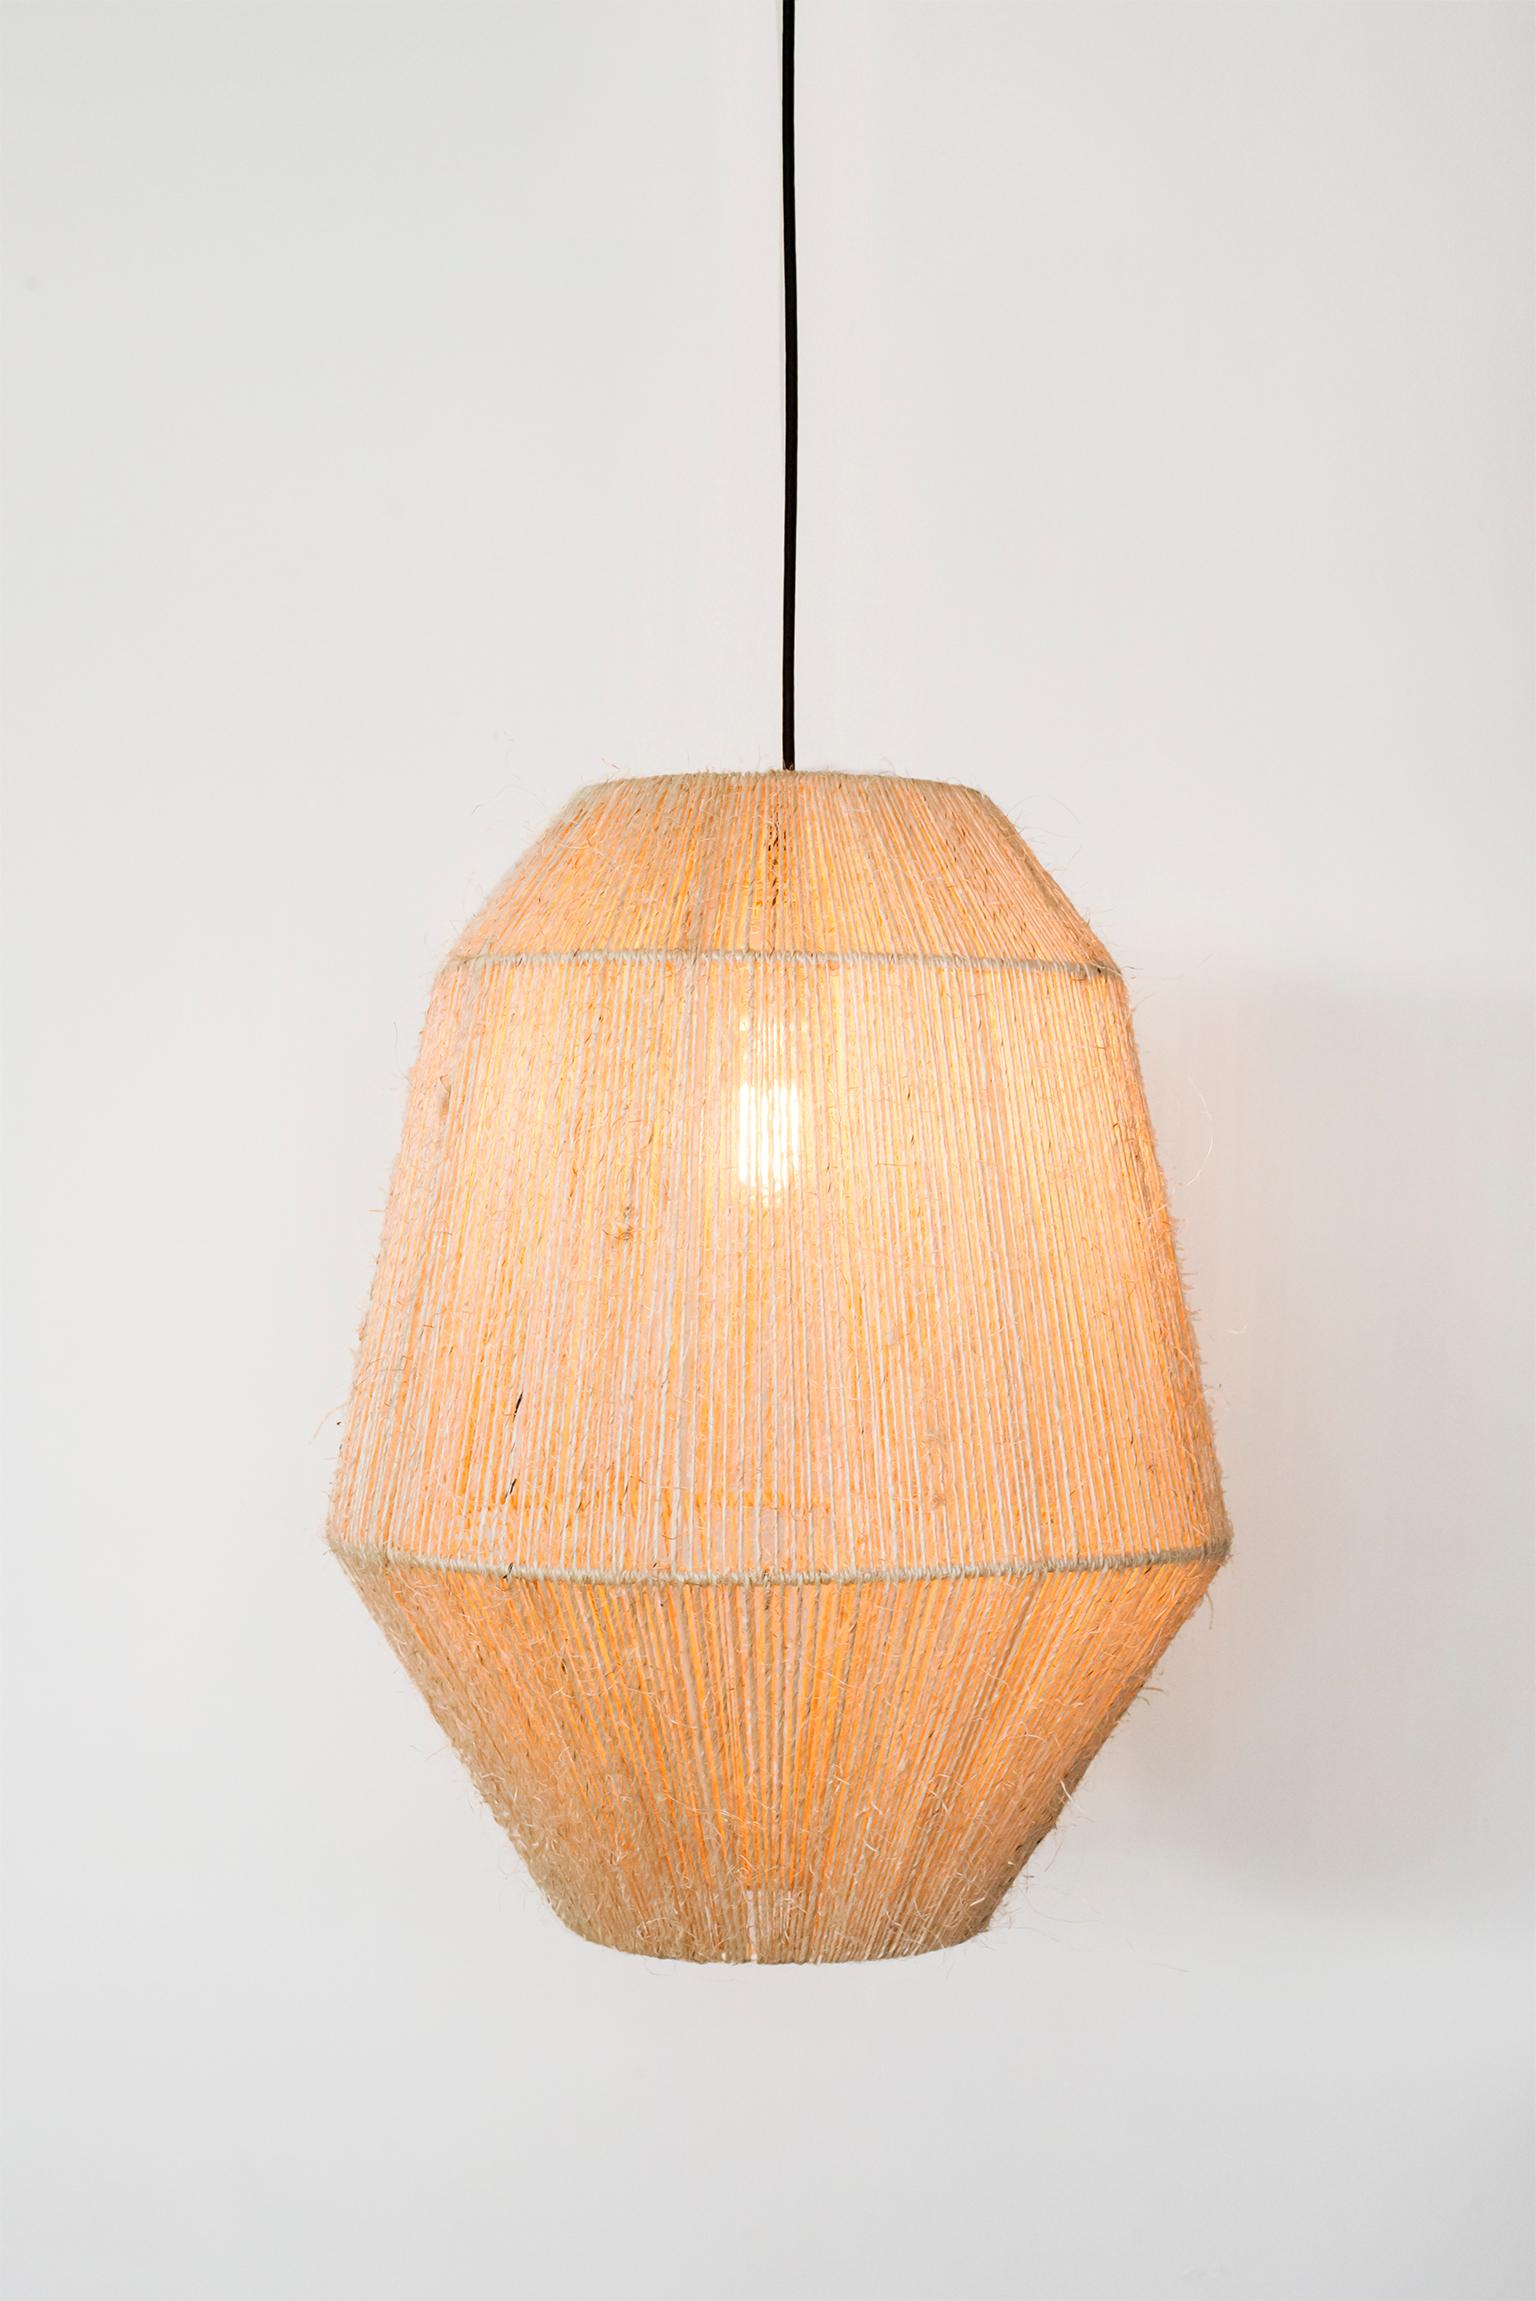 This Handwoven Agave Fiber Sun Light Screen is a unique creation by León León Design from Mexico City.  
Henequén is the name for the Agave fibers used to make this special weaving rope. The same Agave that gives us Tequila and Mezcal. 

The screen